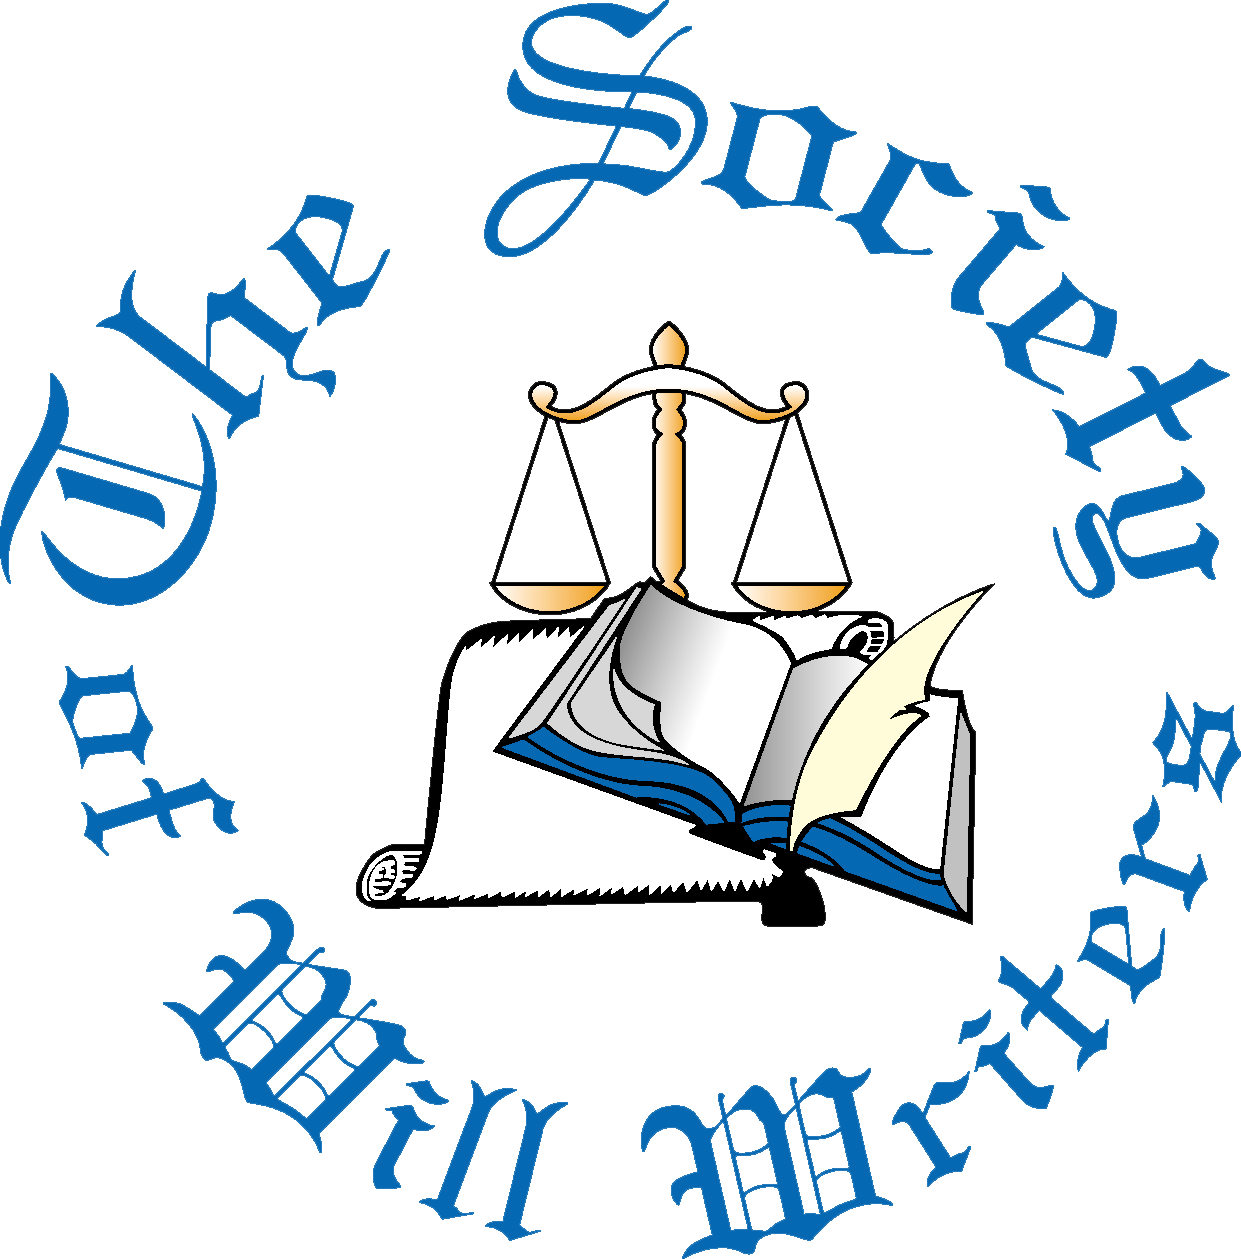 The Society of Will Writers logo